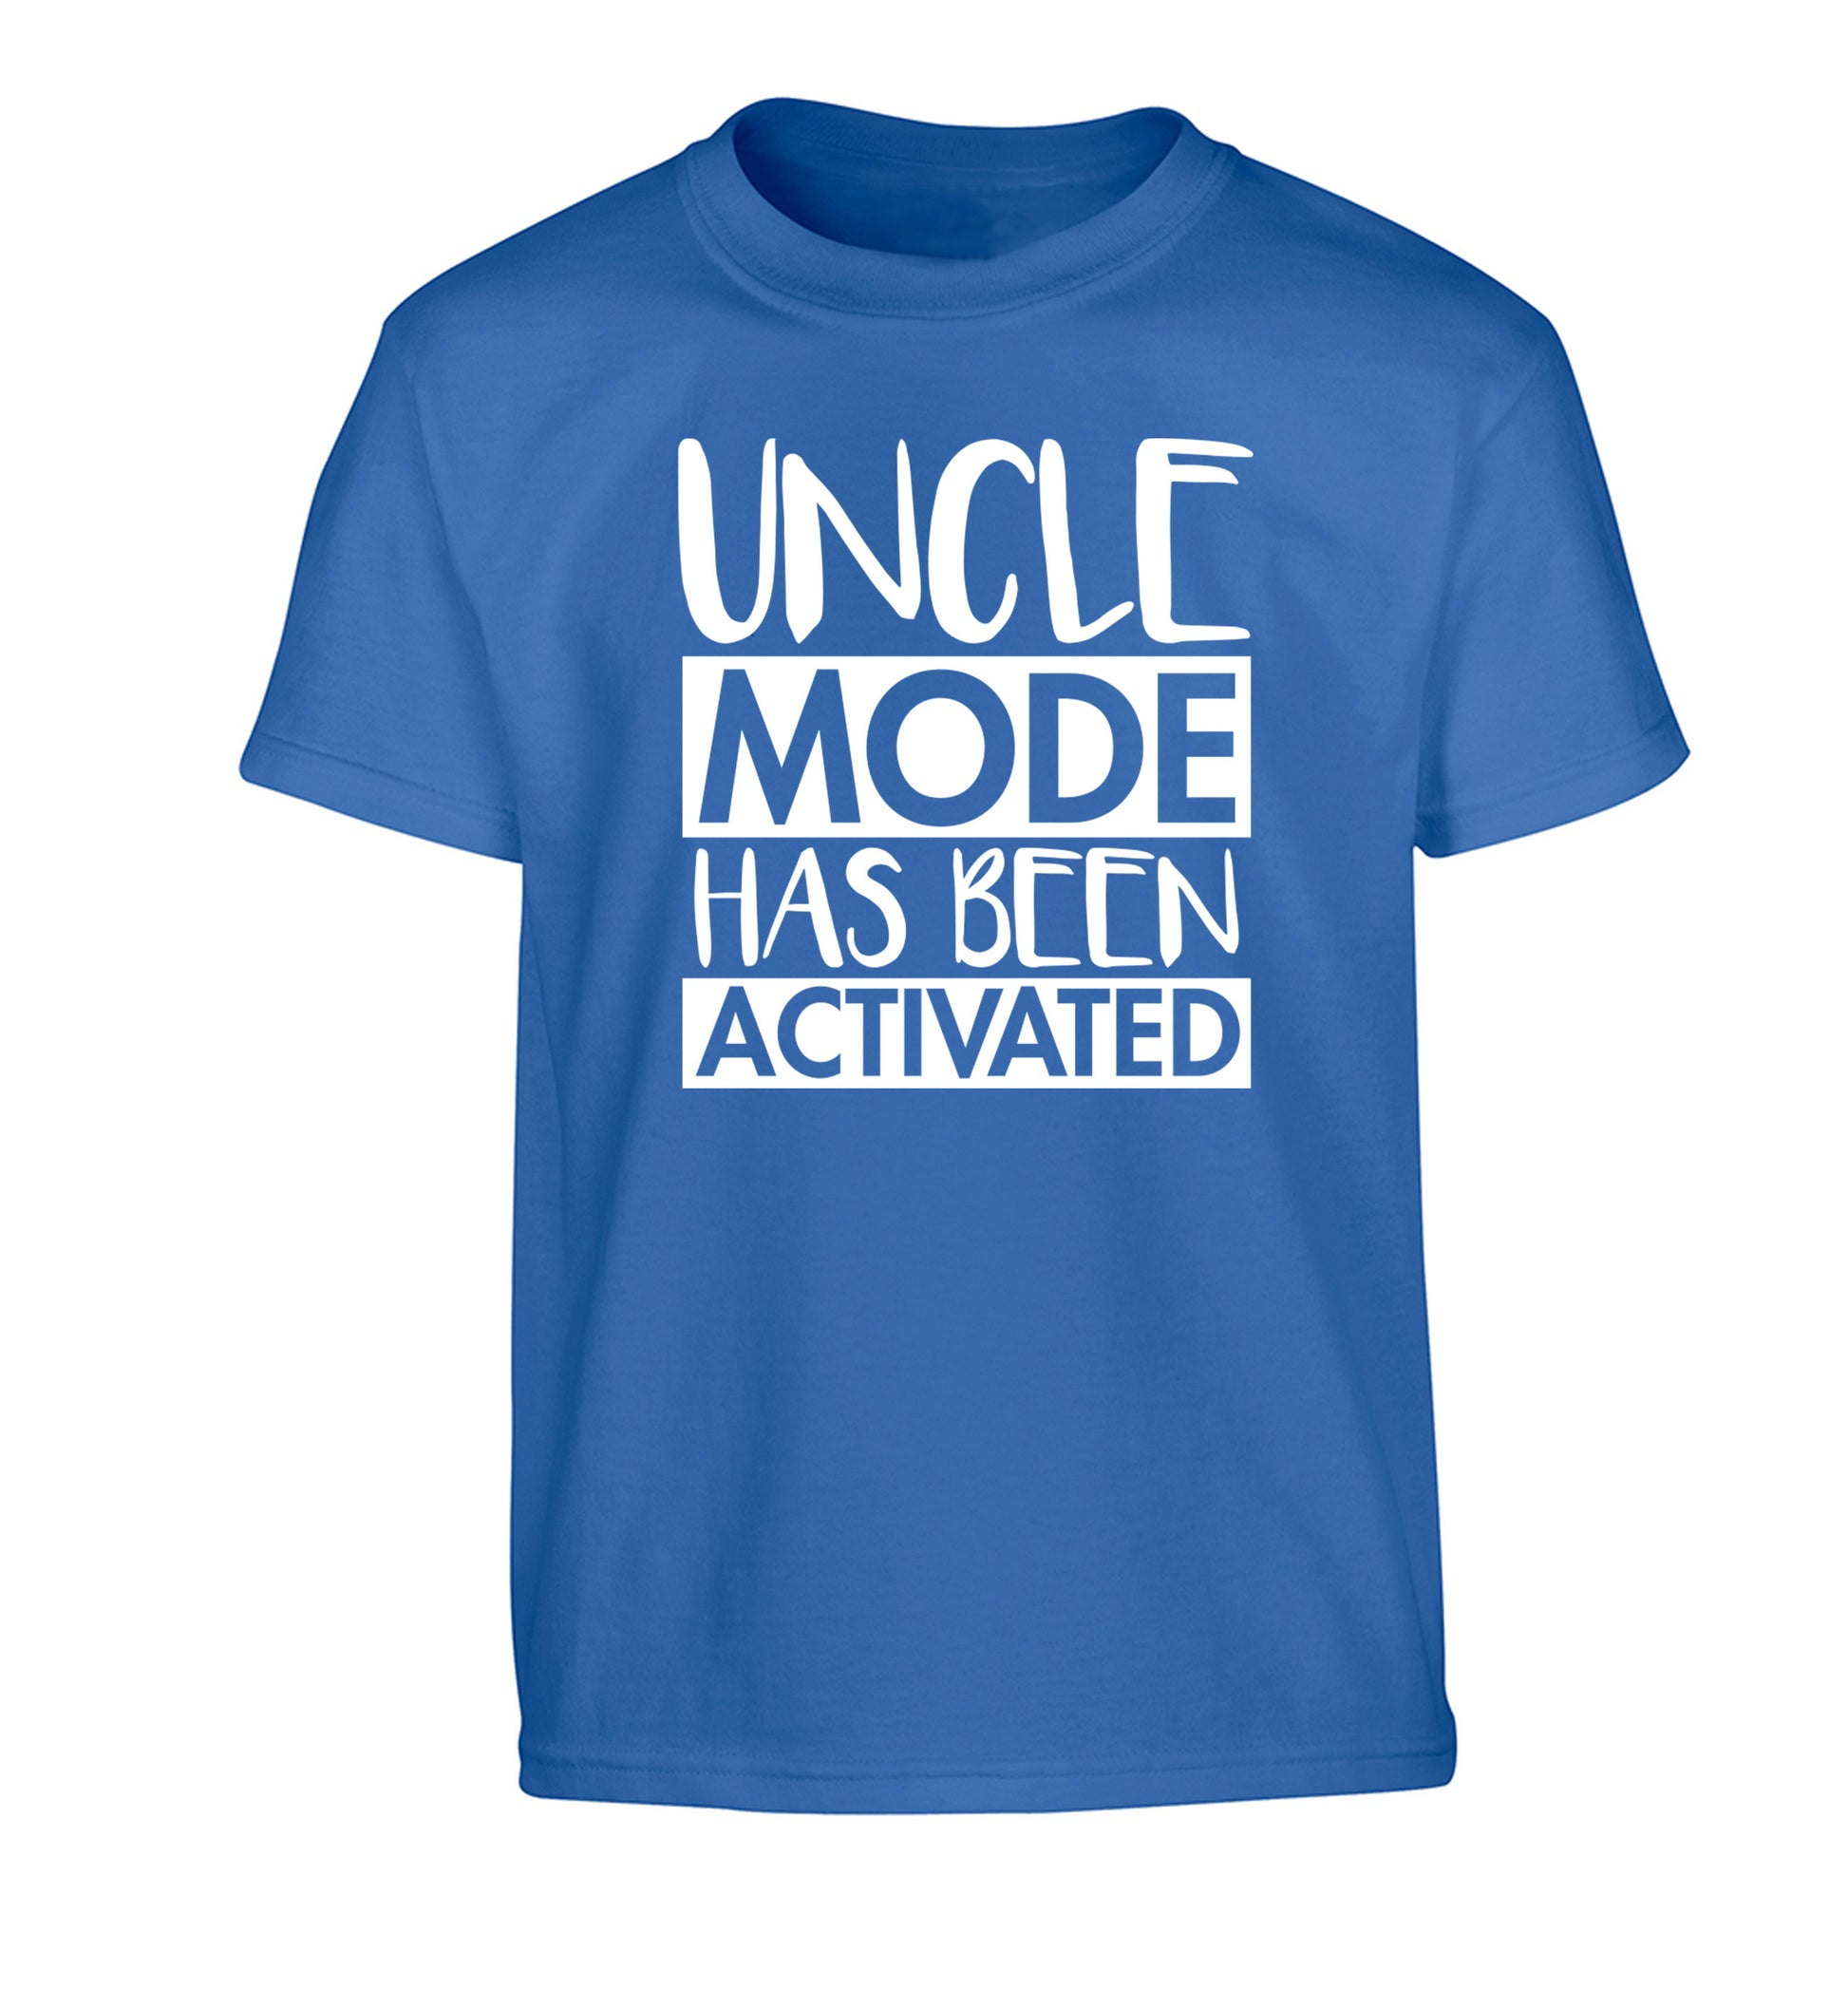 Uncle mode activated Children's blue Tshirt 12-14 Years